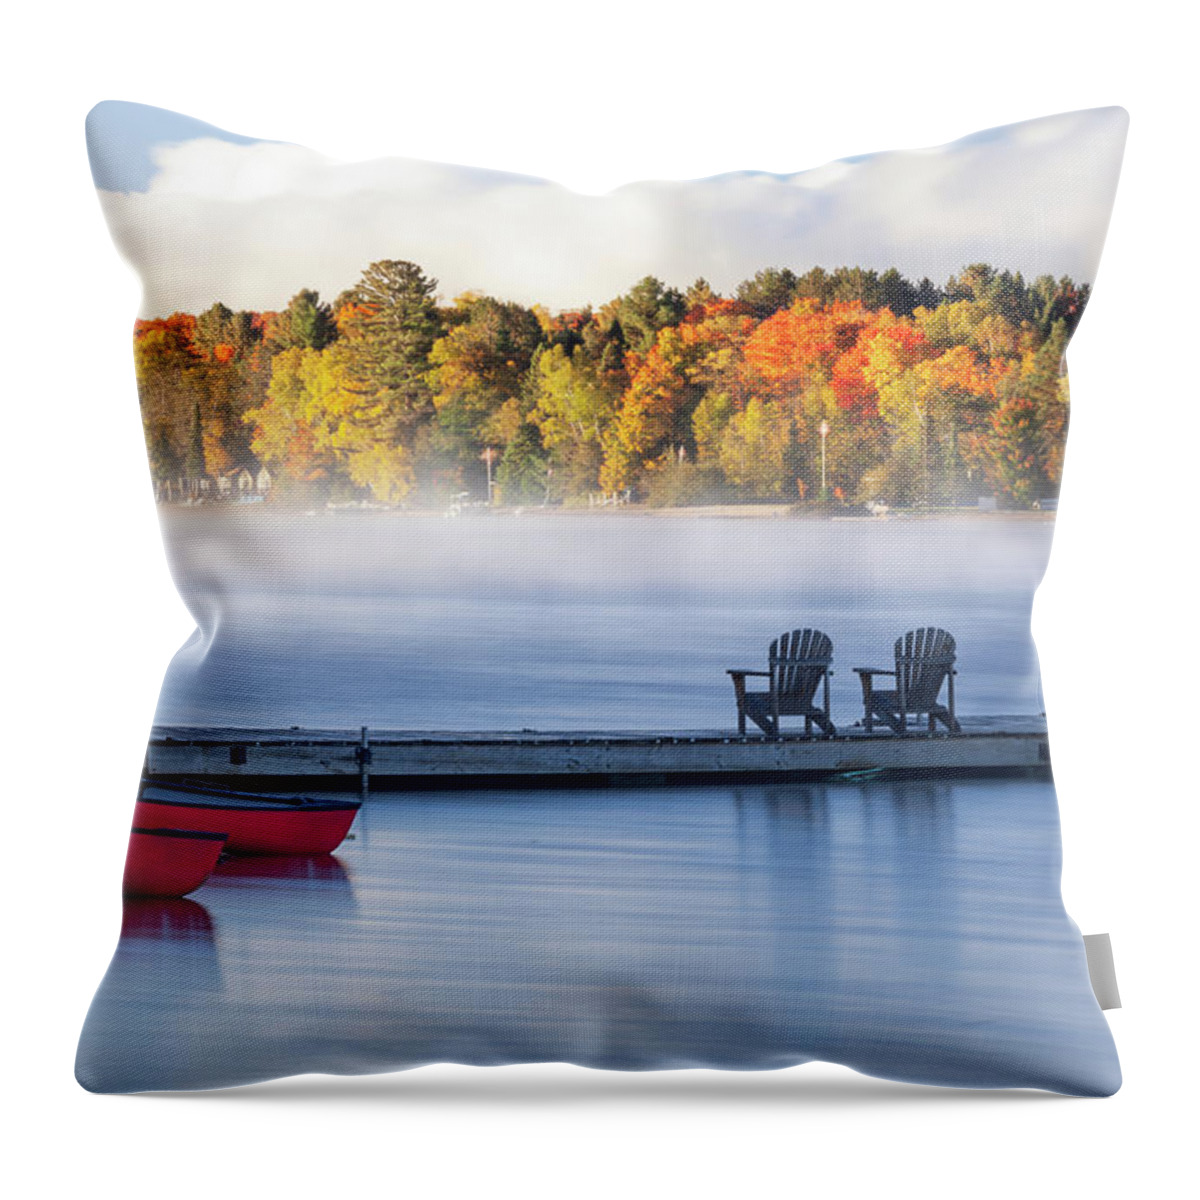 Algonquin Throw Pillow featuring the photograph A Misty Fall Morning by Manpreet Sokhi